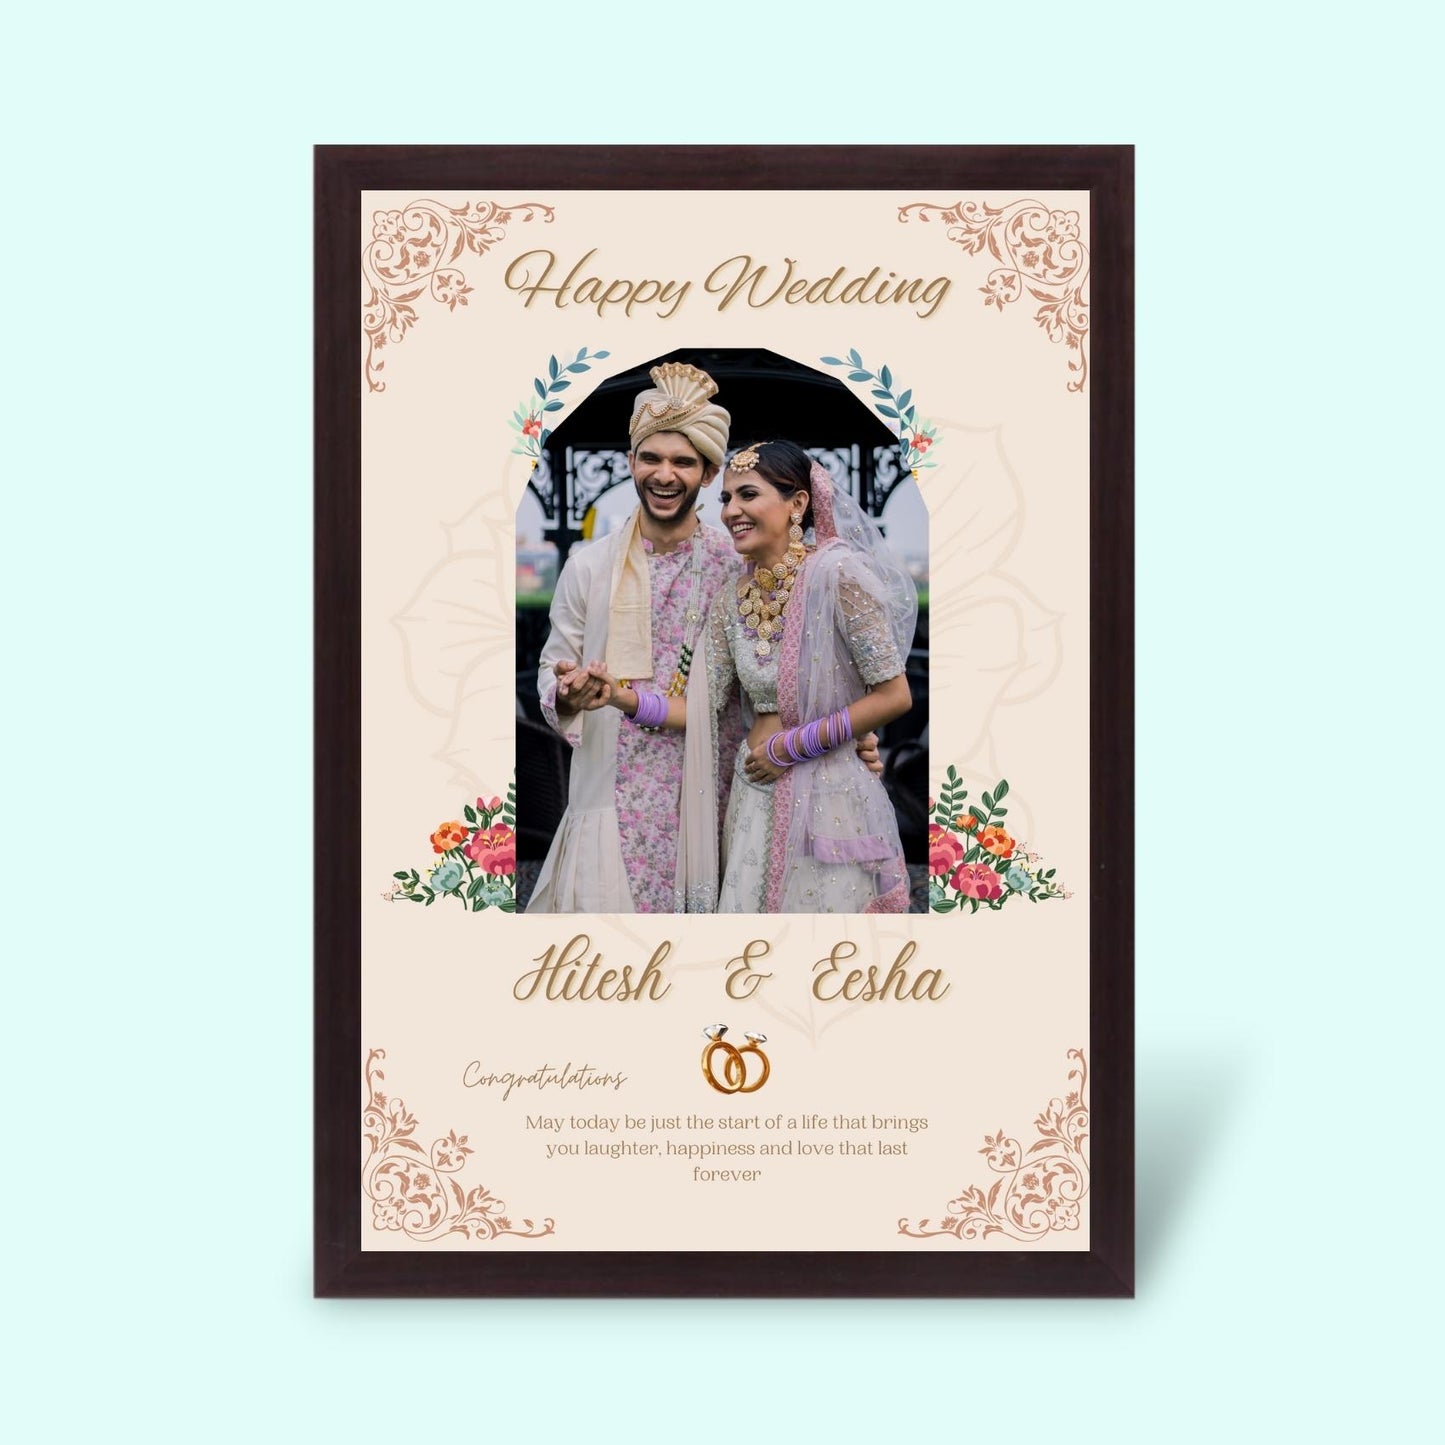 Personalized Weeding Frame - Best Gift